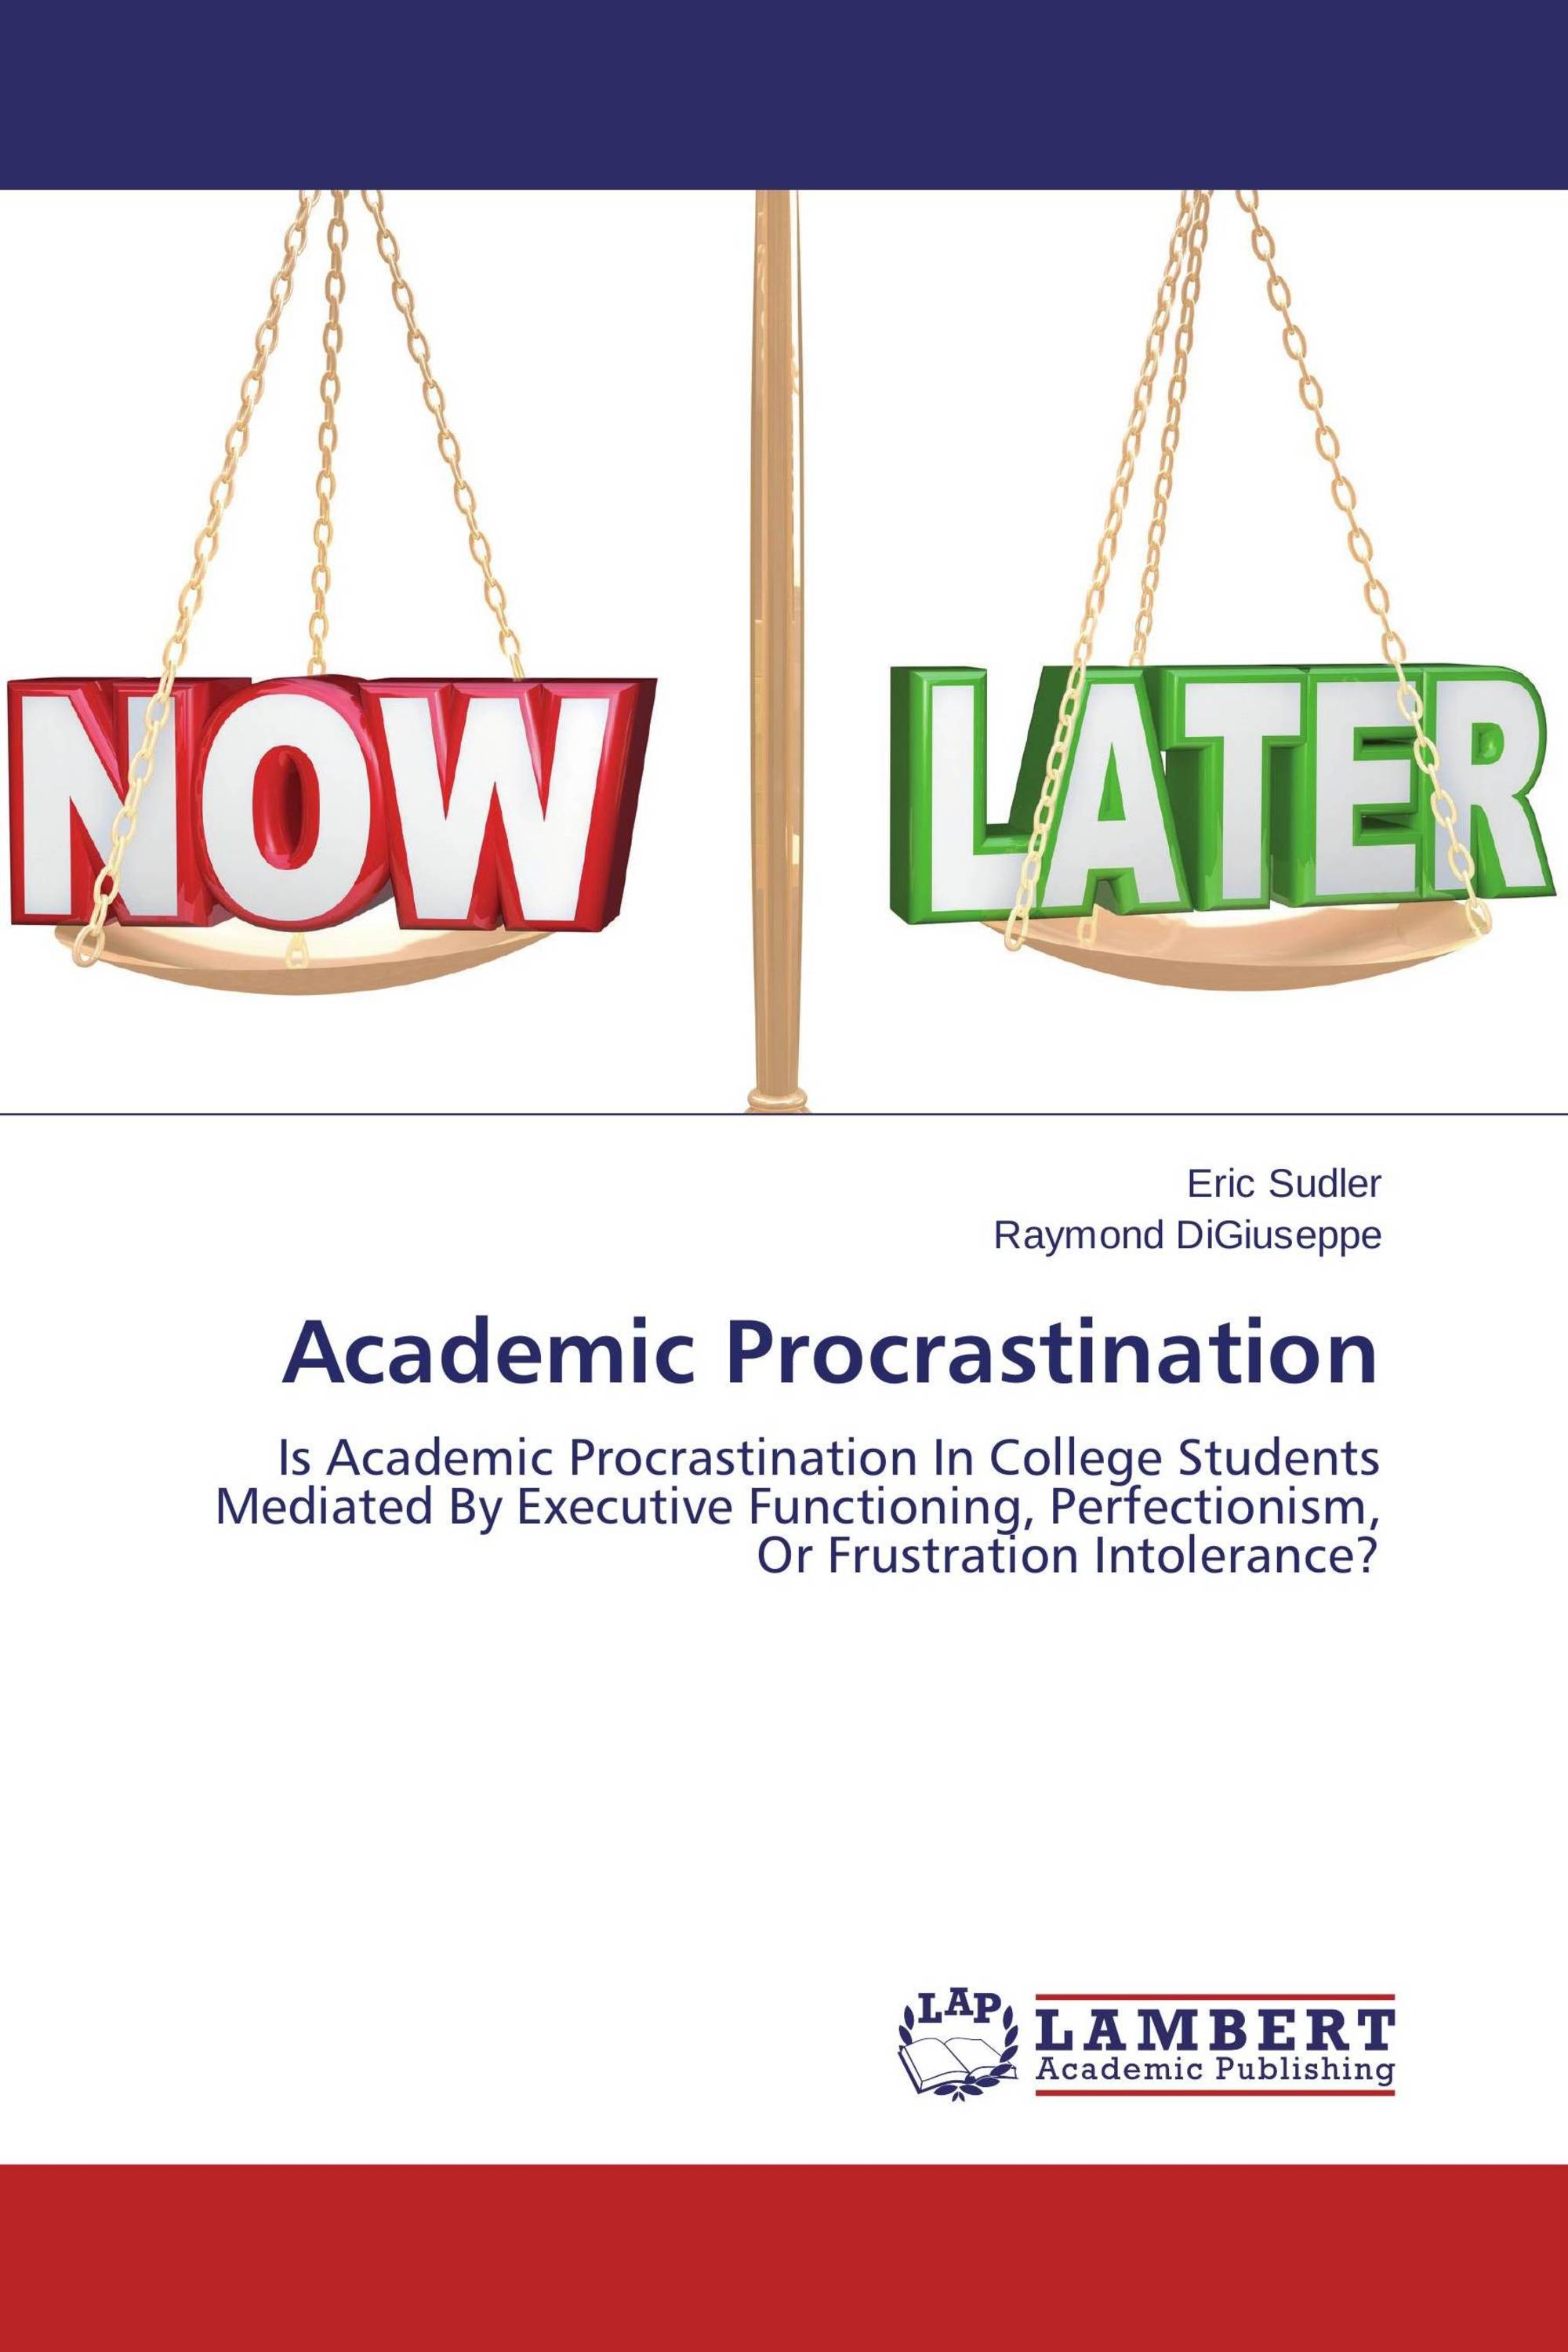 research about academic procrastination